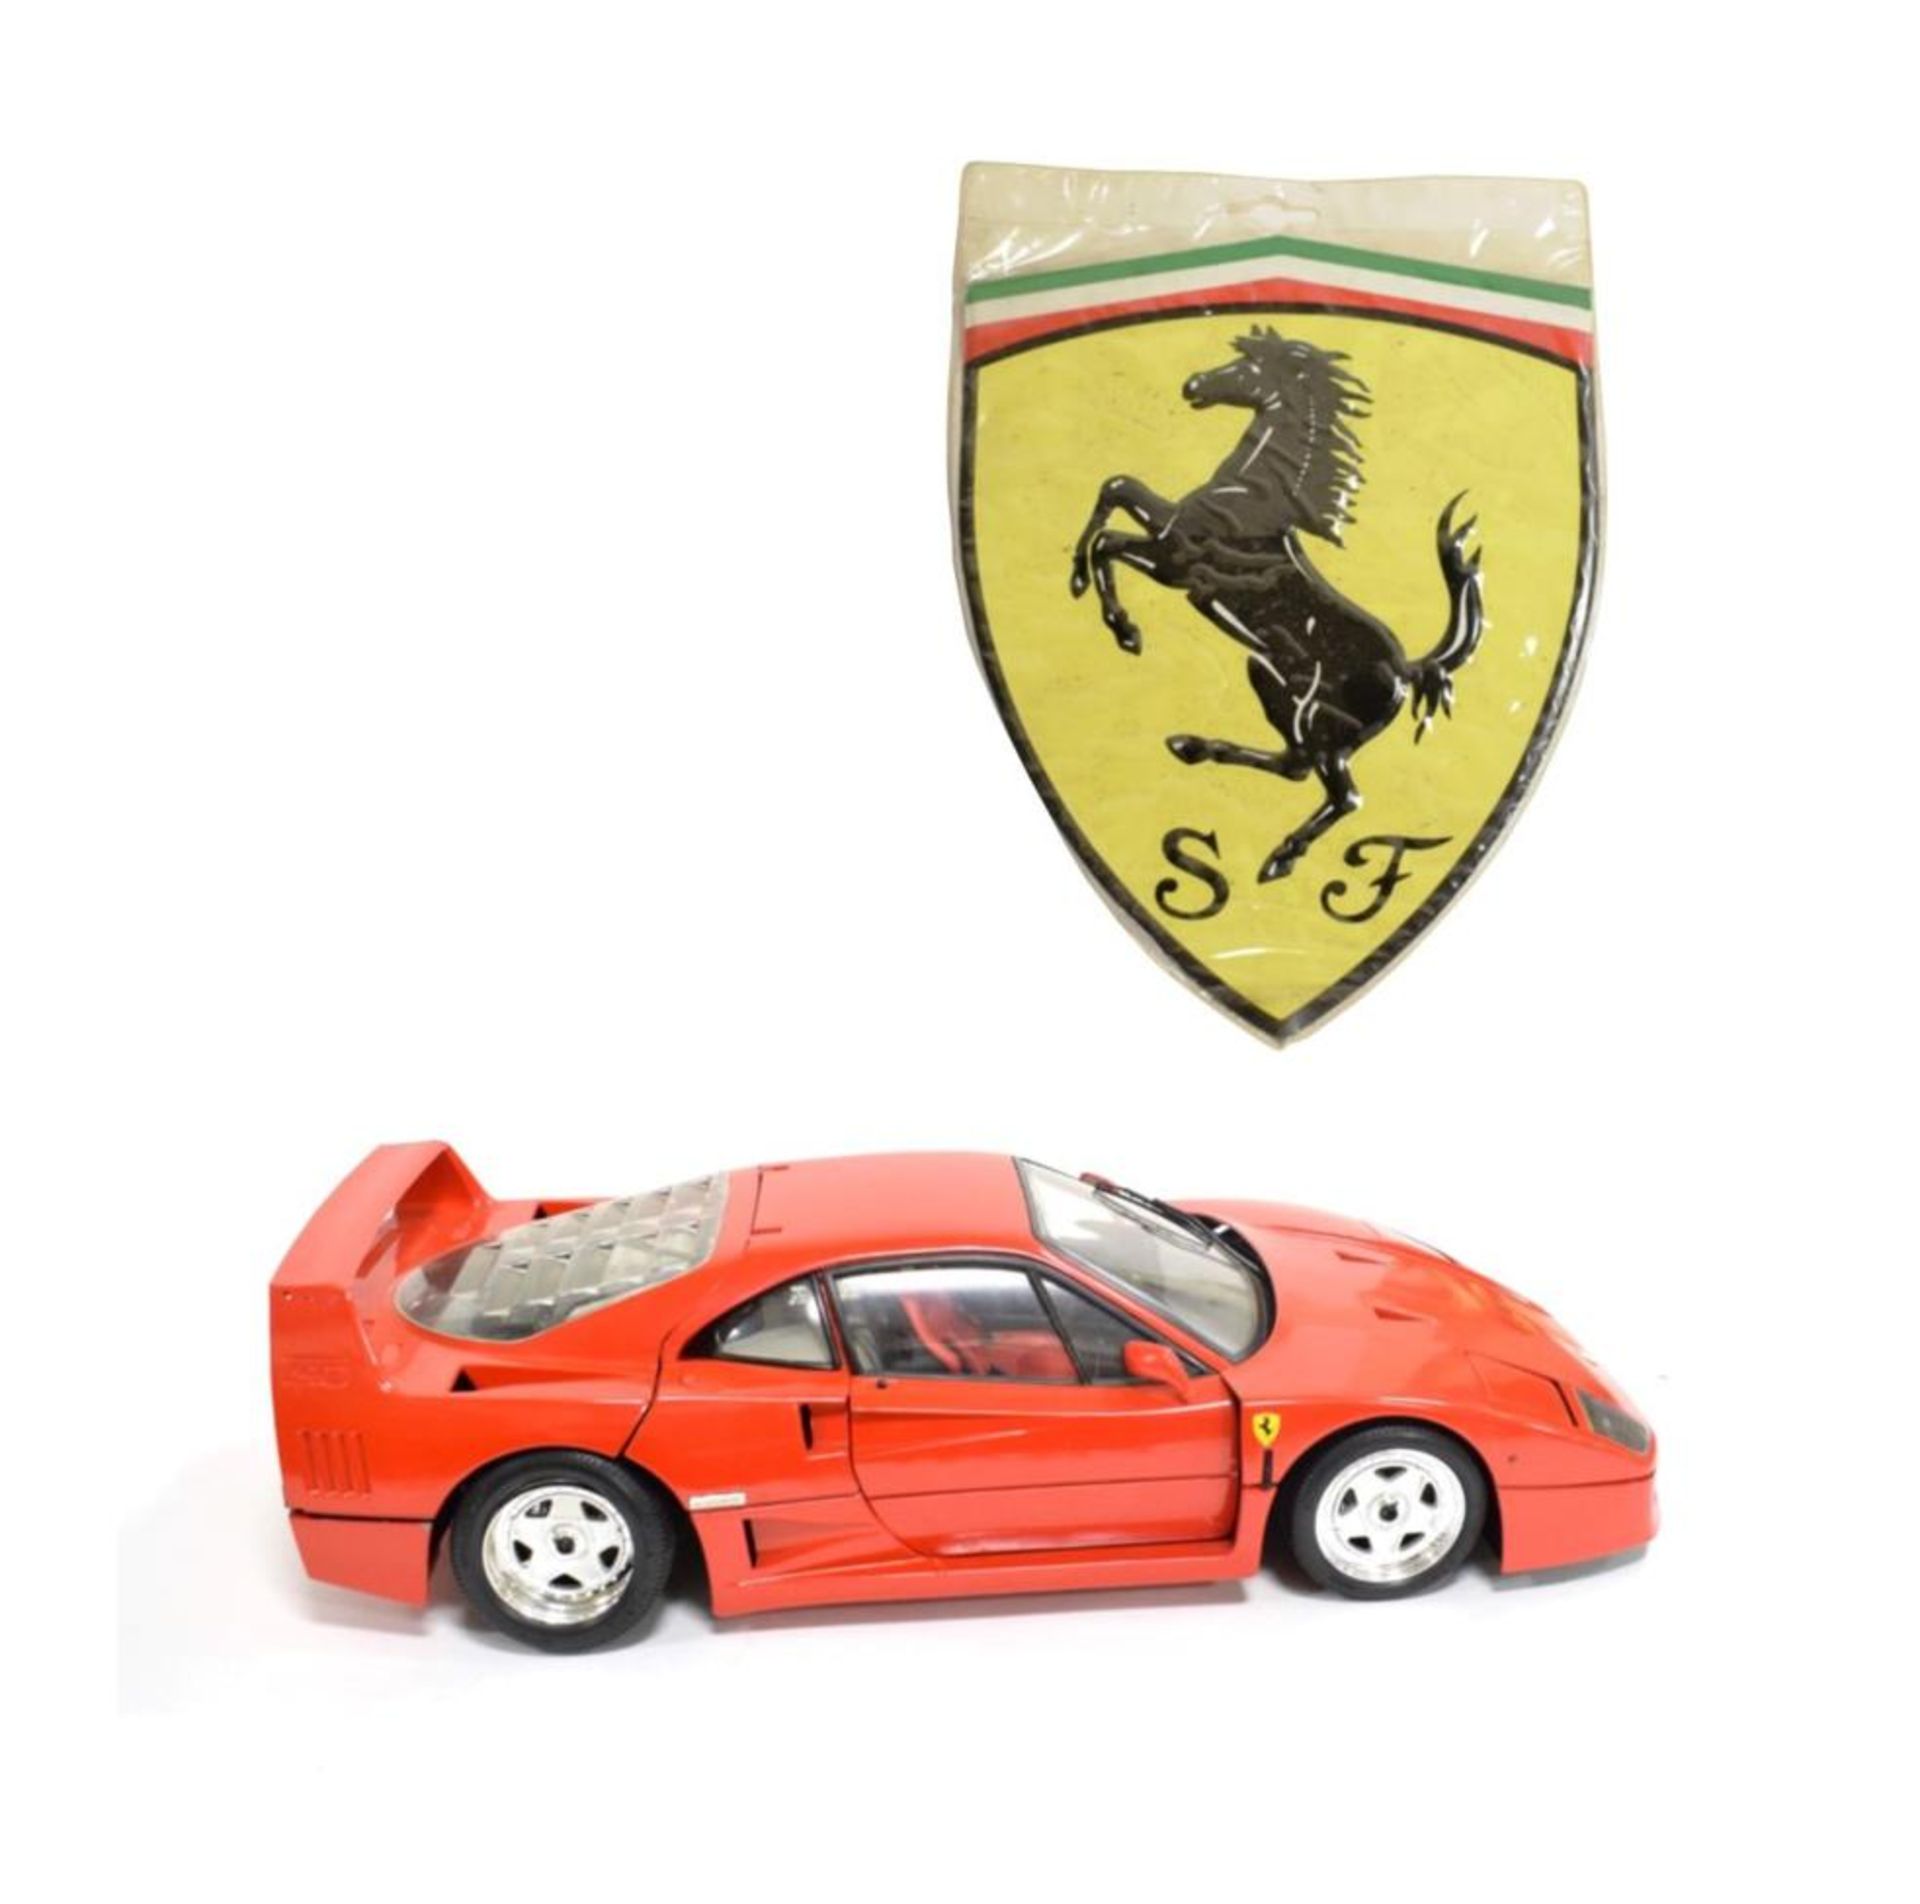 A Diecast Scale Model of a Ferrari F40, by Rivarossi, with pivoting wheels, hinged doors, bonnet and